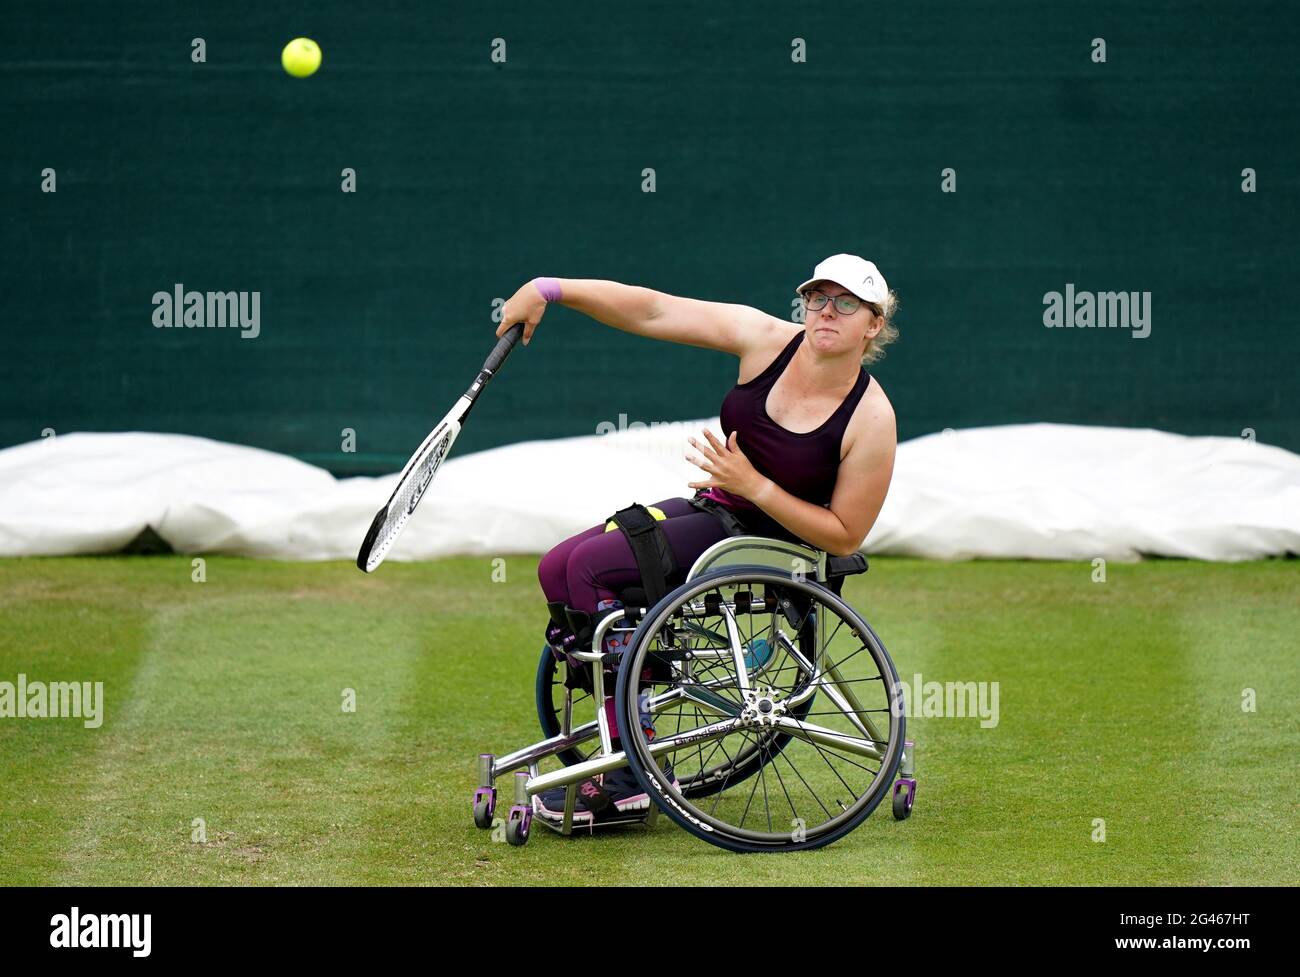 Great Britain's Abbie Breakwell in action against Great Britain's Jordanne Whiley during day six of the Viking Classic at the Edgbaston Priory Club, Birmingham. Picture date: Saturday June 19, 2021. Stock Photo